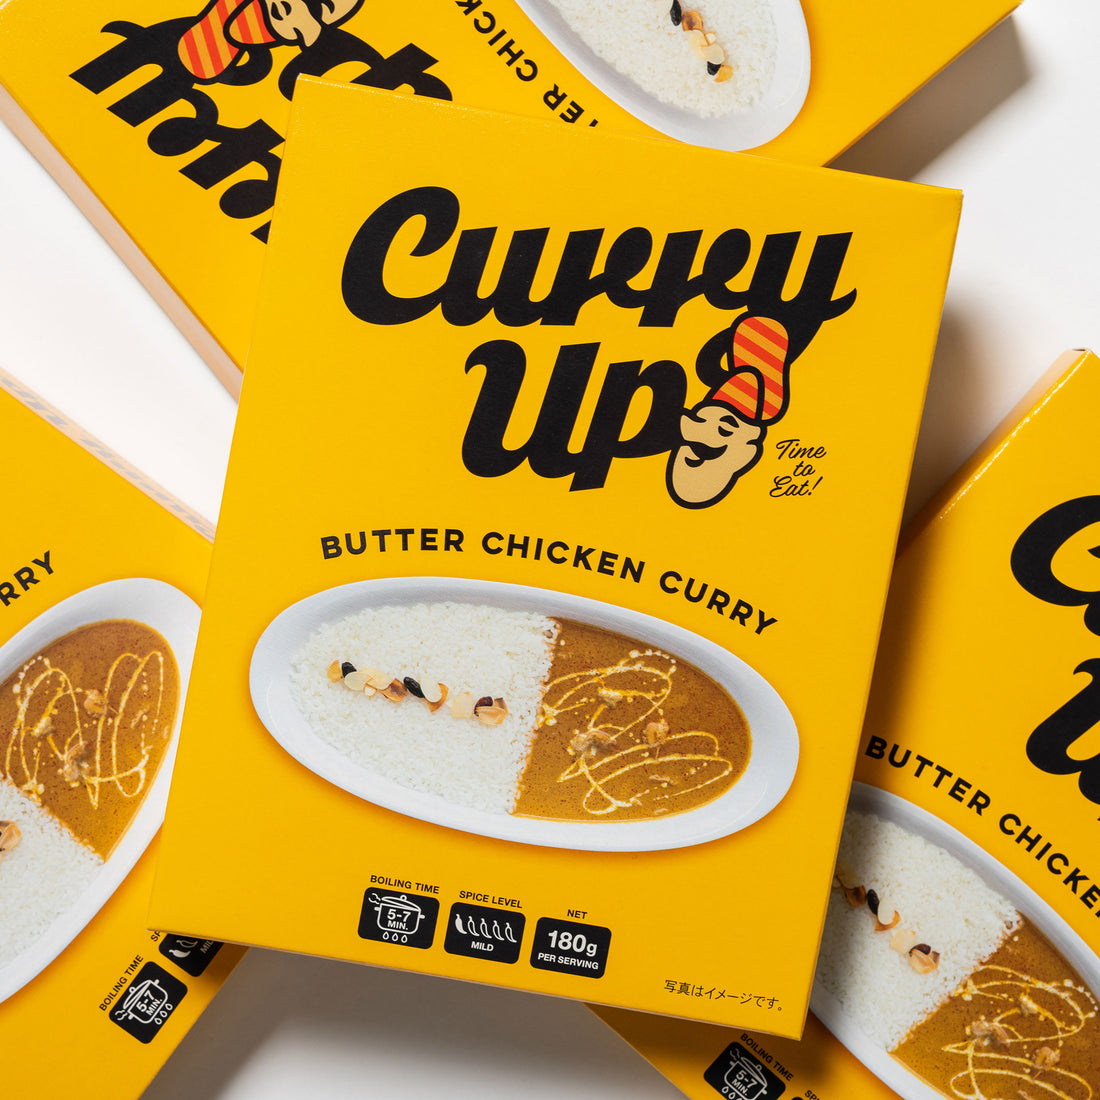 CURRY UP 初となるレトルトカレー「CURRY UP BUTTER CHICKEN CURRY